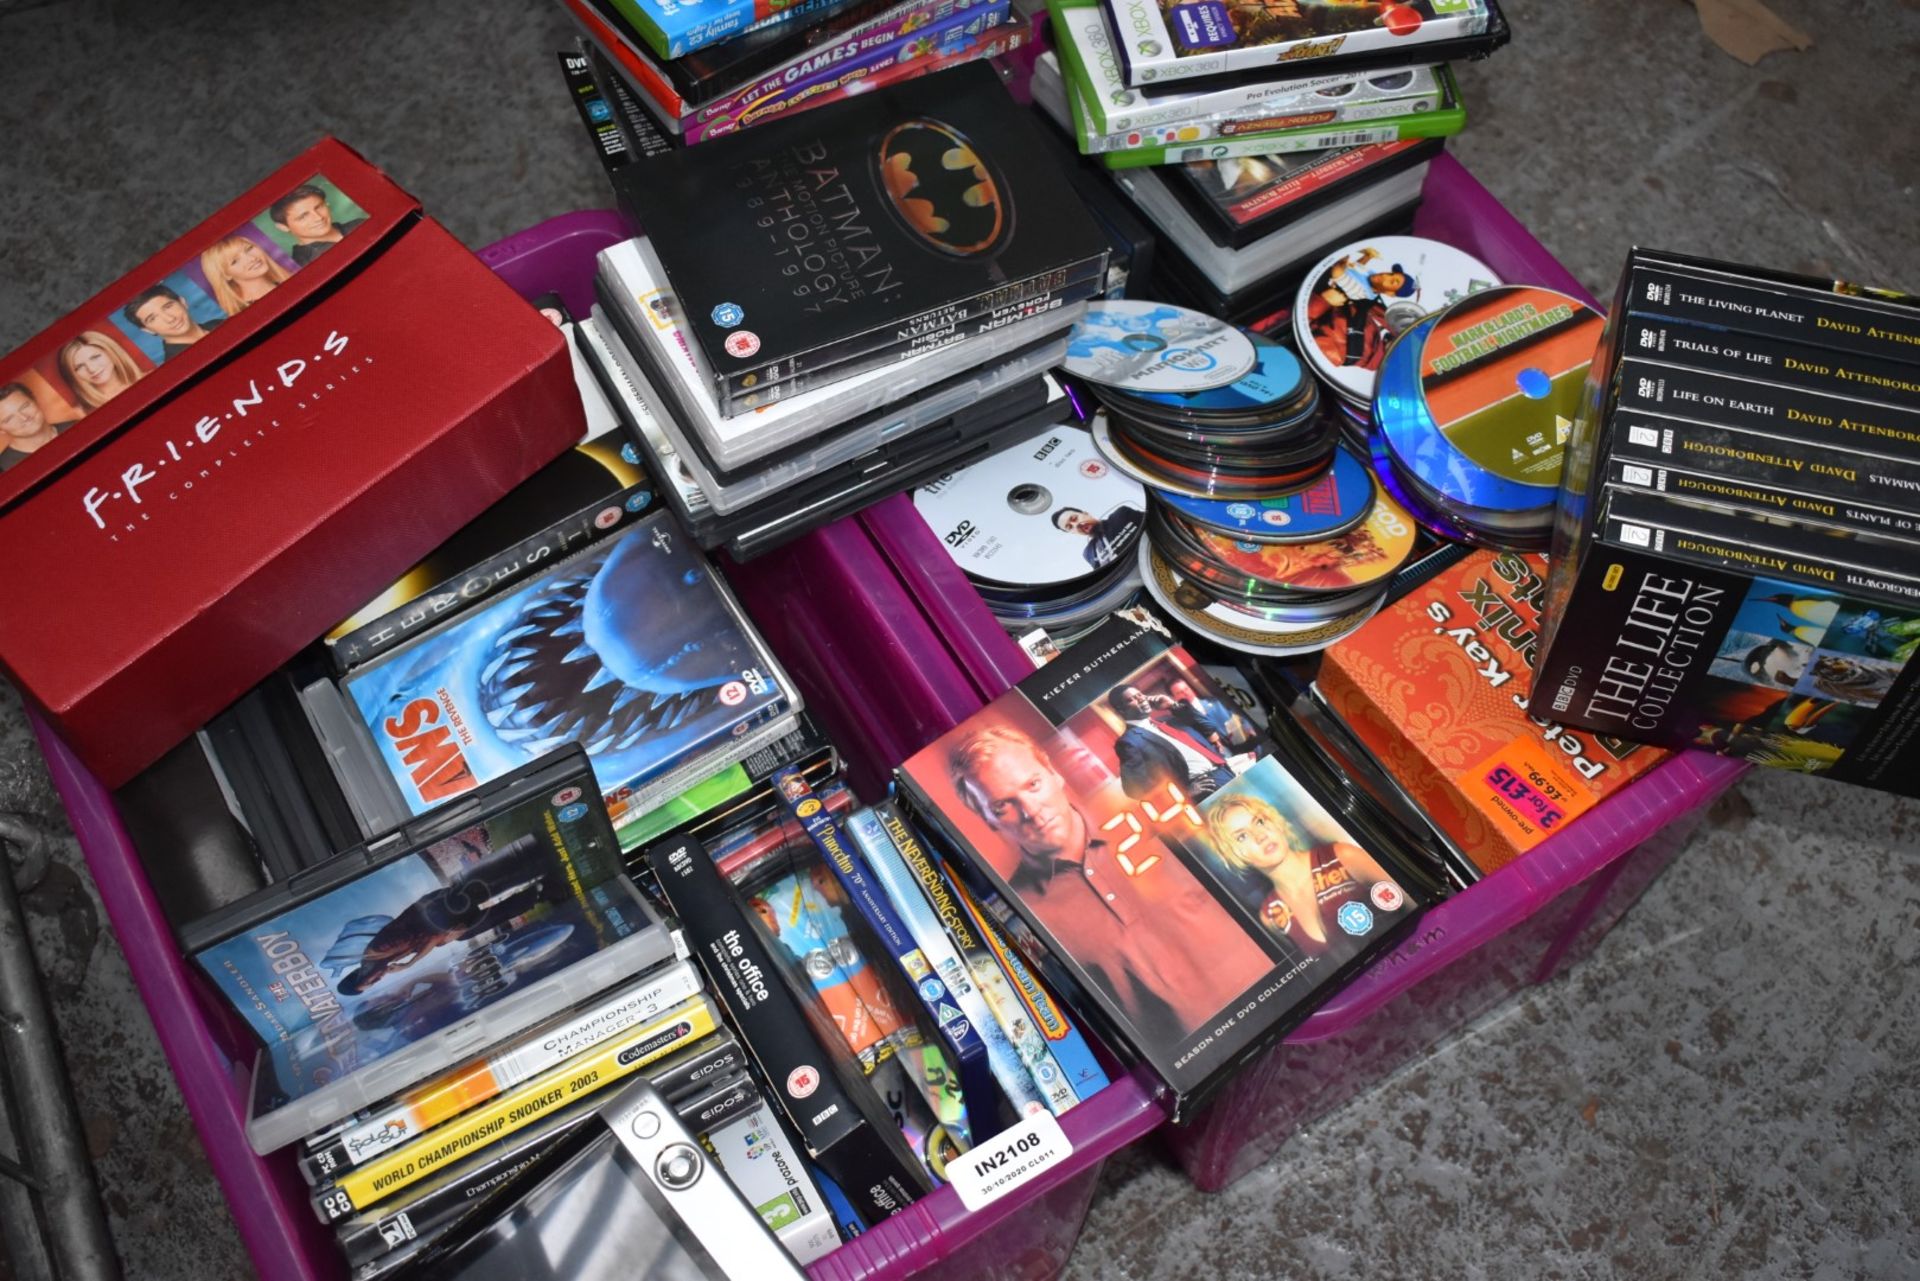 1 x Large Collection of DVD Films and Games - Plus Box Sets and Portable DVD Player - Ref: In2108 - Image 7 of 10